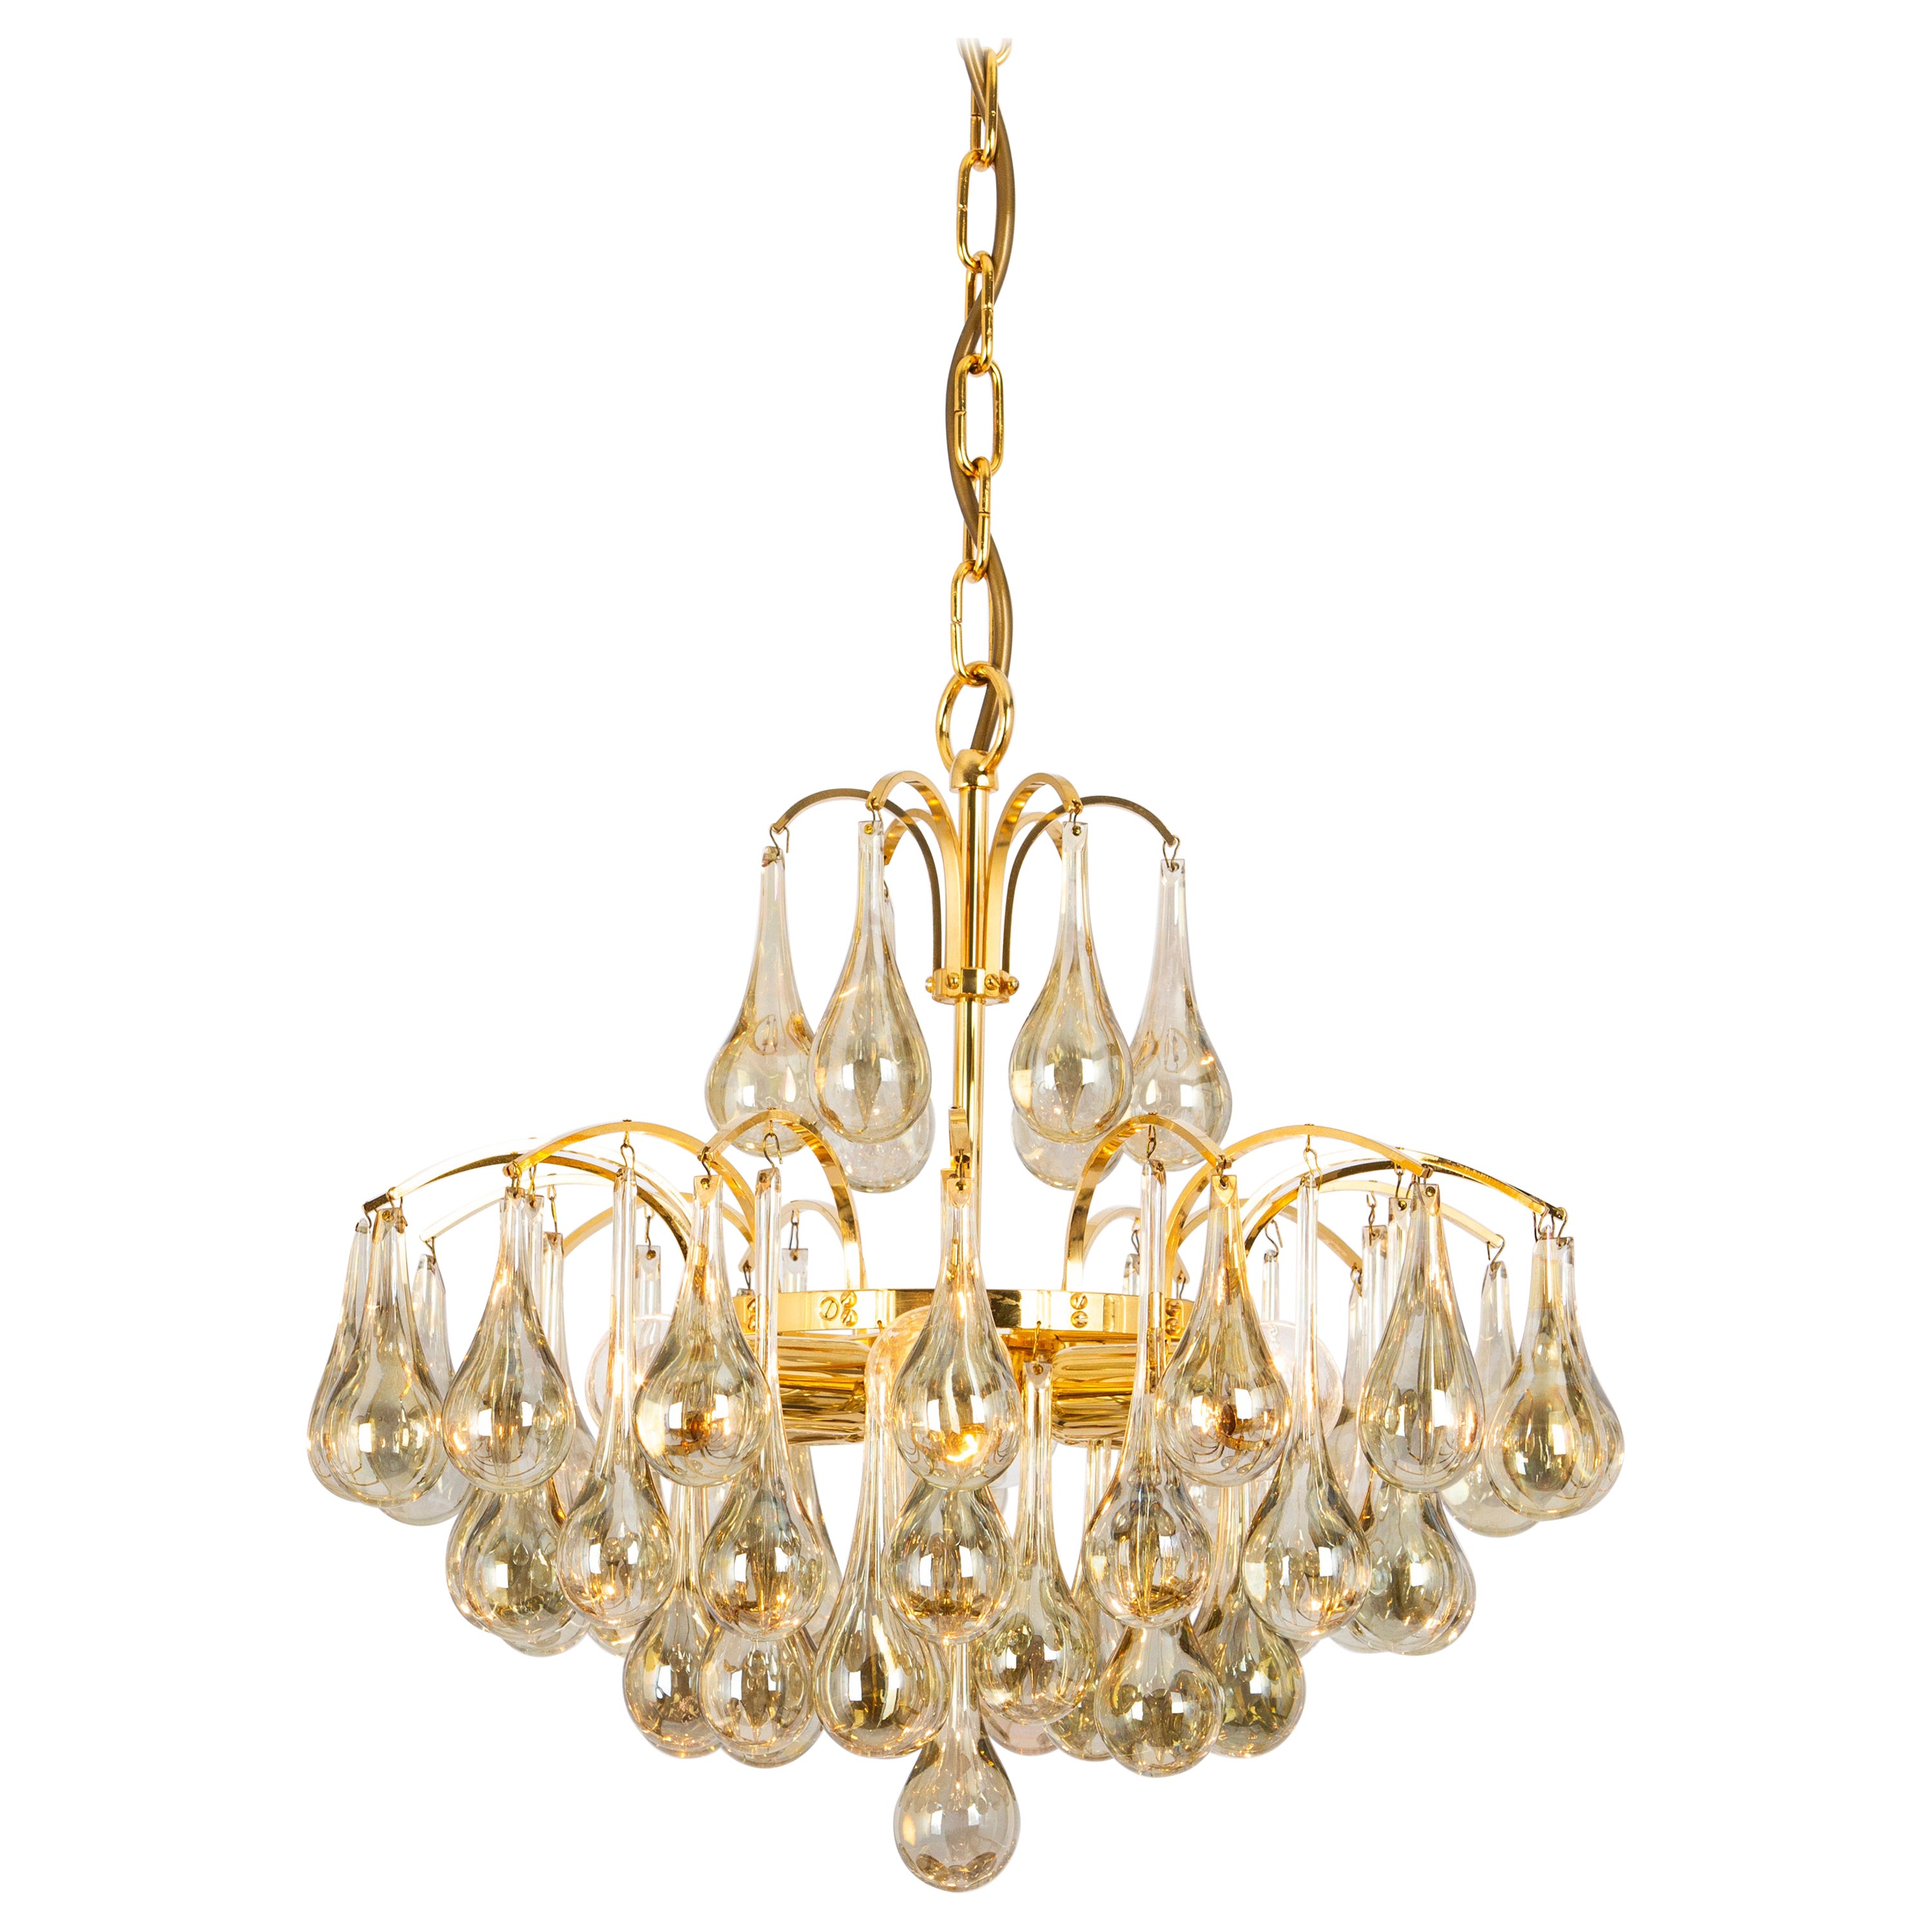 Large Murano Glass Tear Drop Chandelier, Christoph Palme, Germany, 1970s For Sale